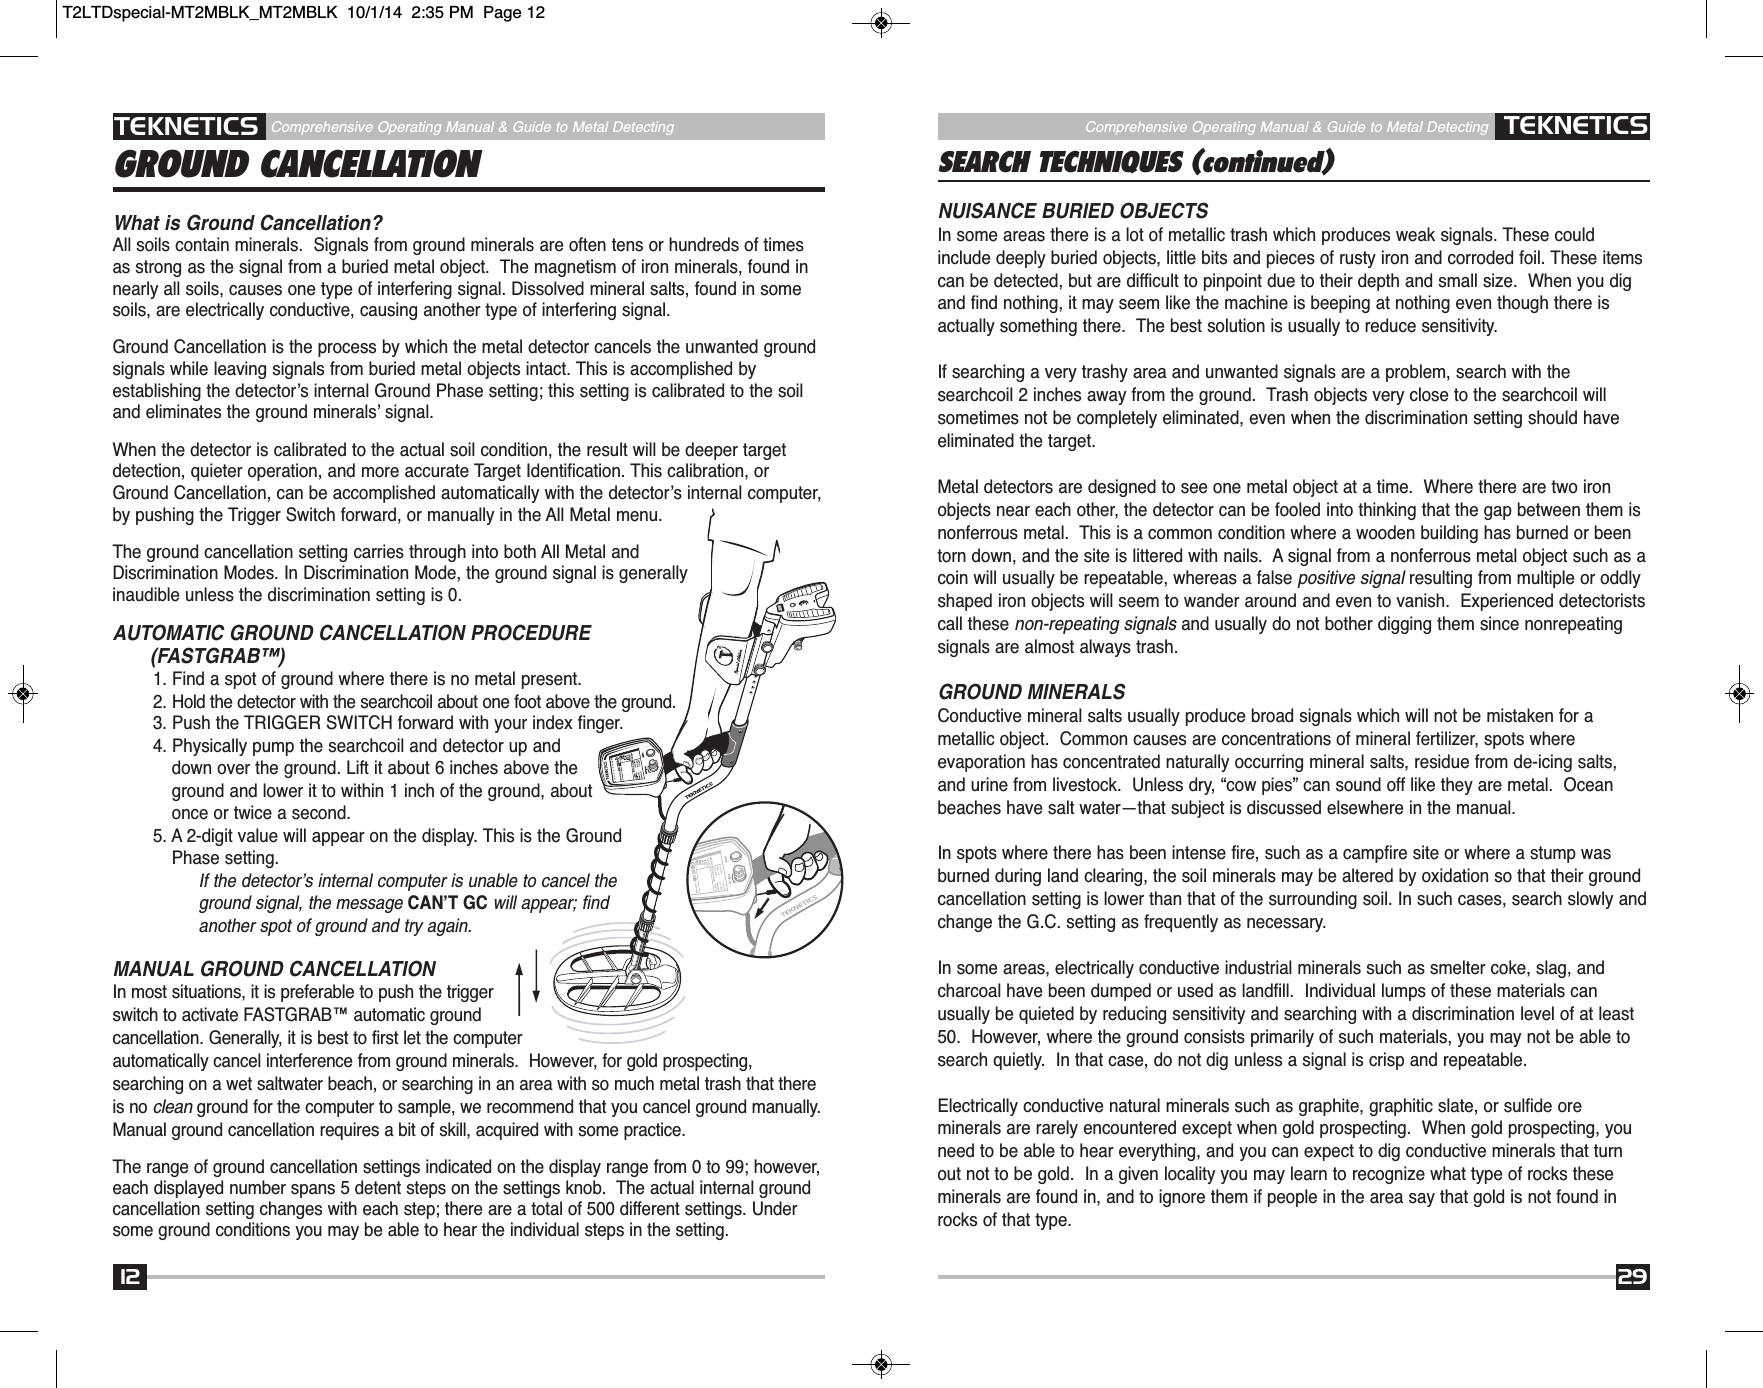 Page 12 of First Texas T2MD Professional Metal Detector User Manual Layout 1